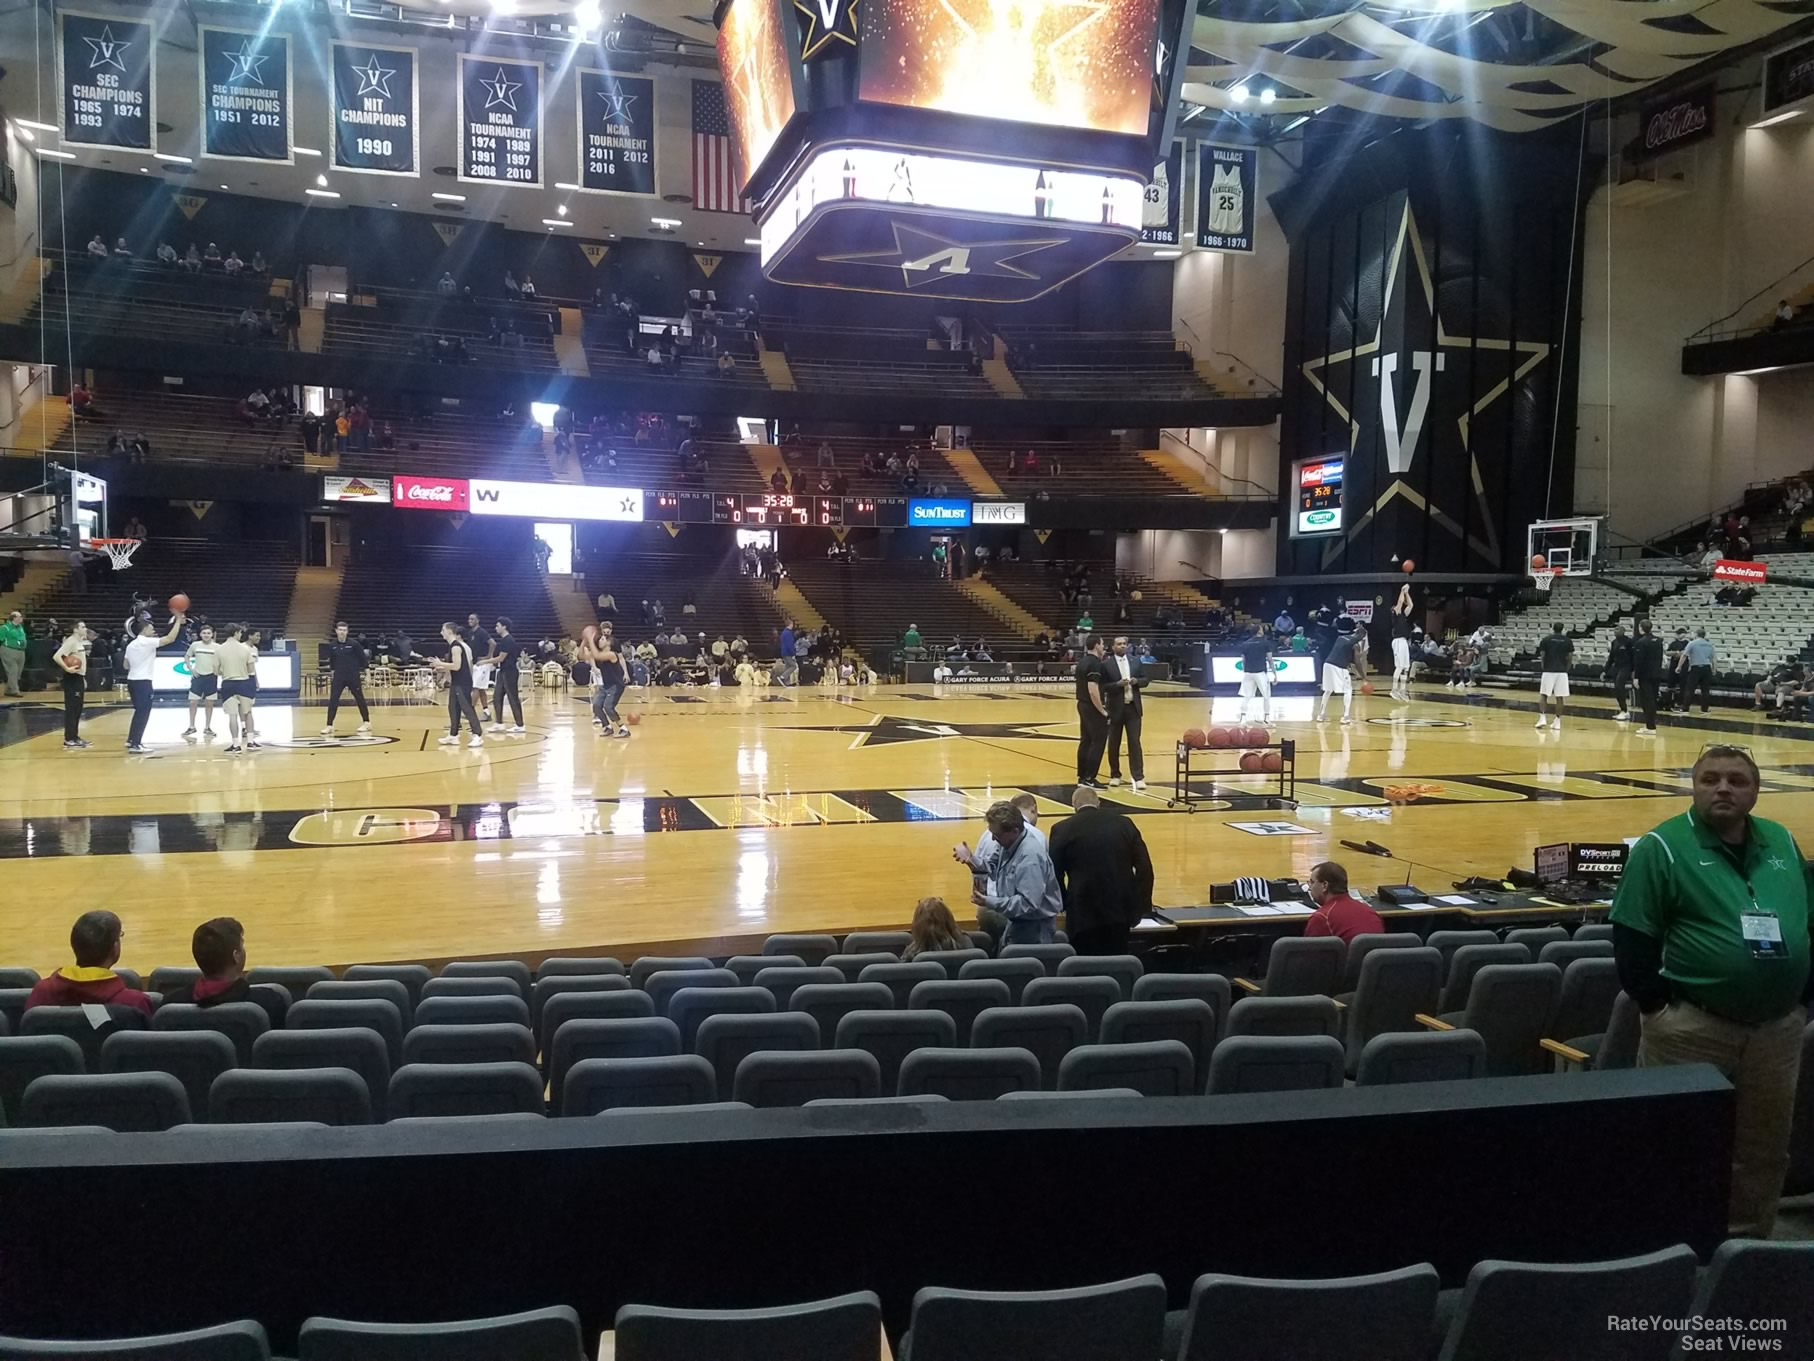 section d, row 13 seat view  - memorial gymnasium